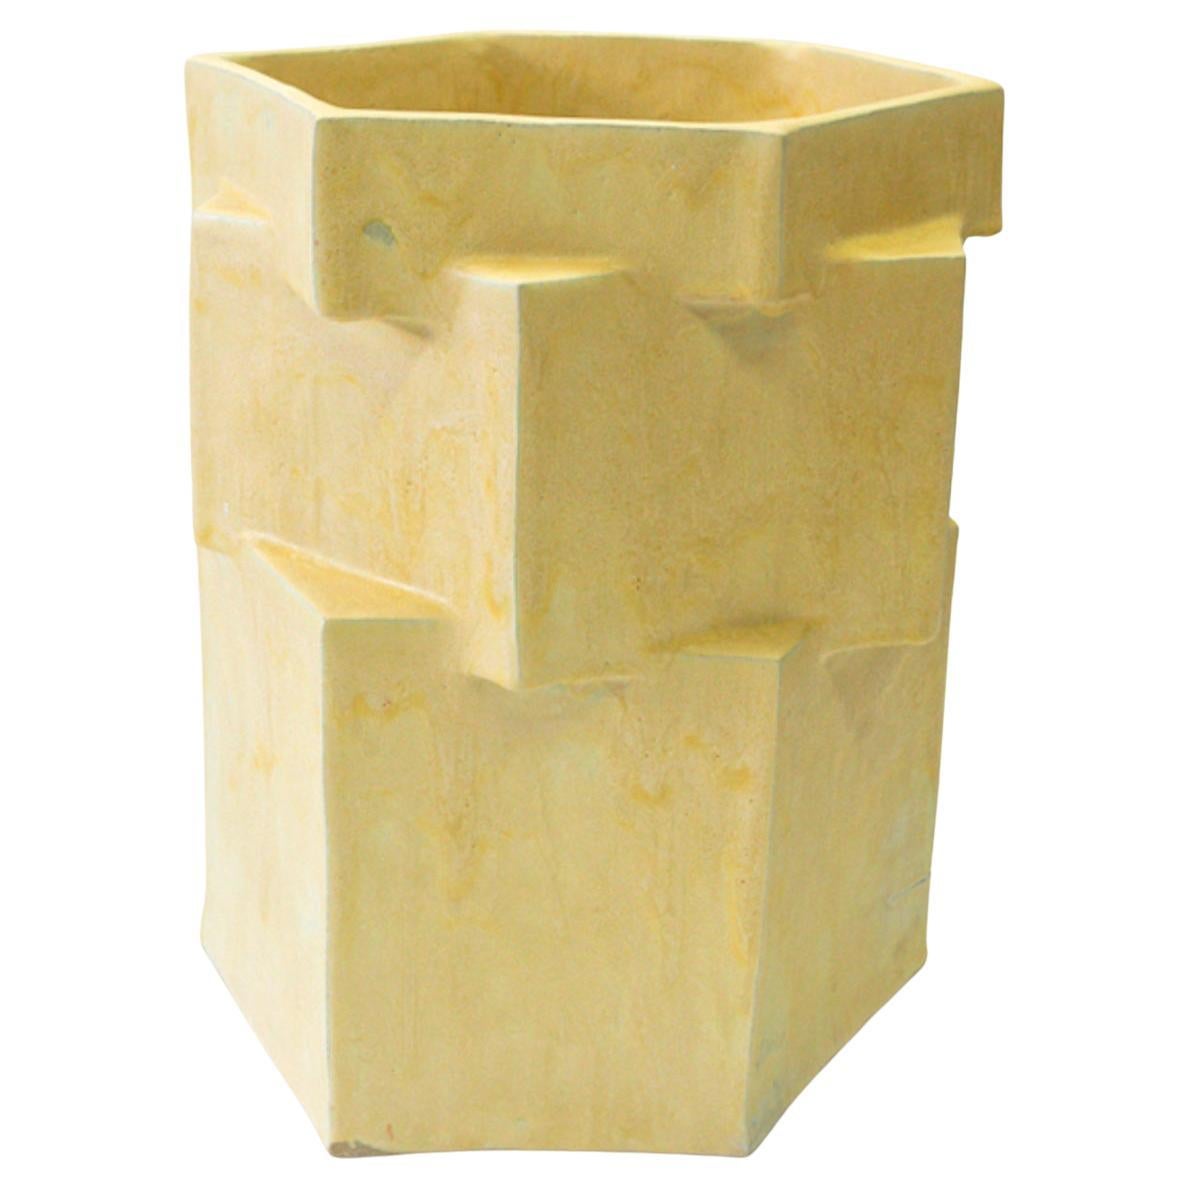 Three-Tier Ceramic Hex Planter in Buttery Yellow by Bzippy For Sale